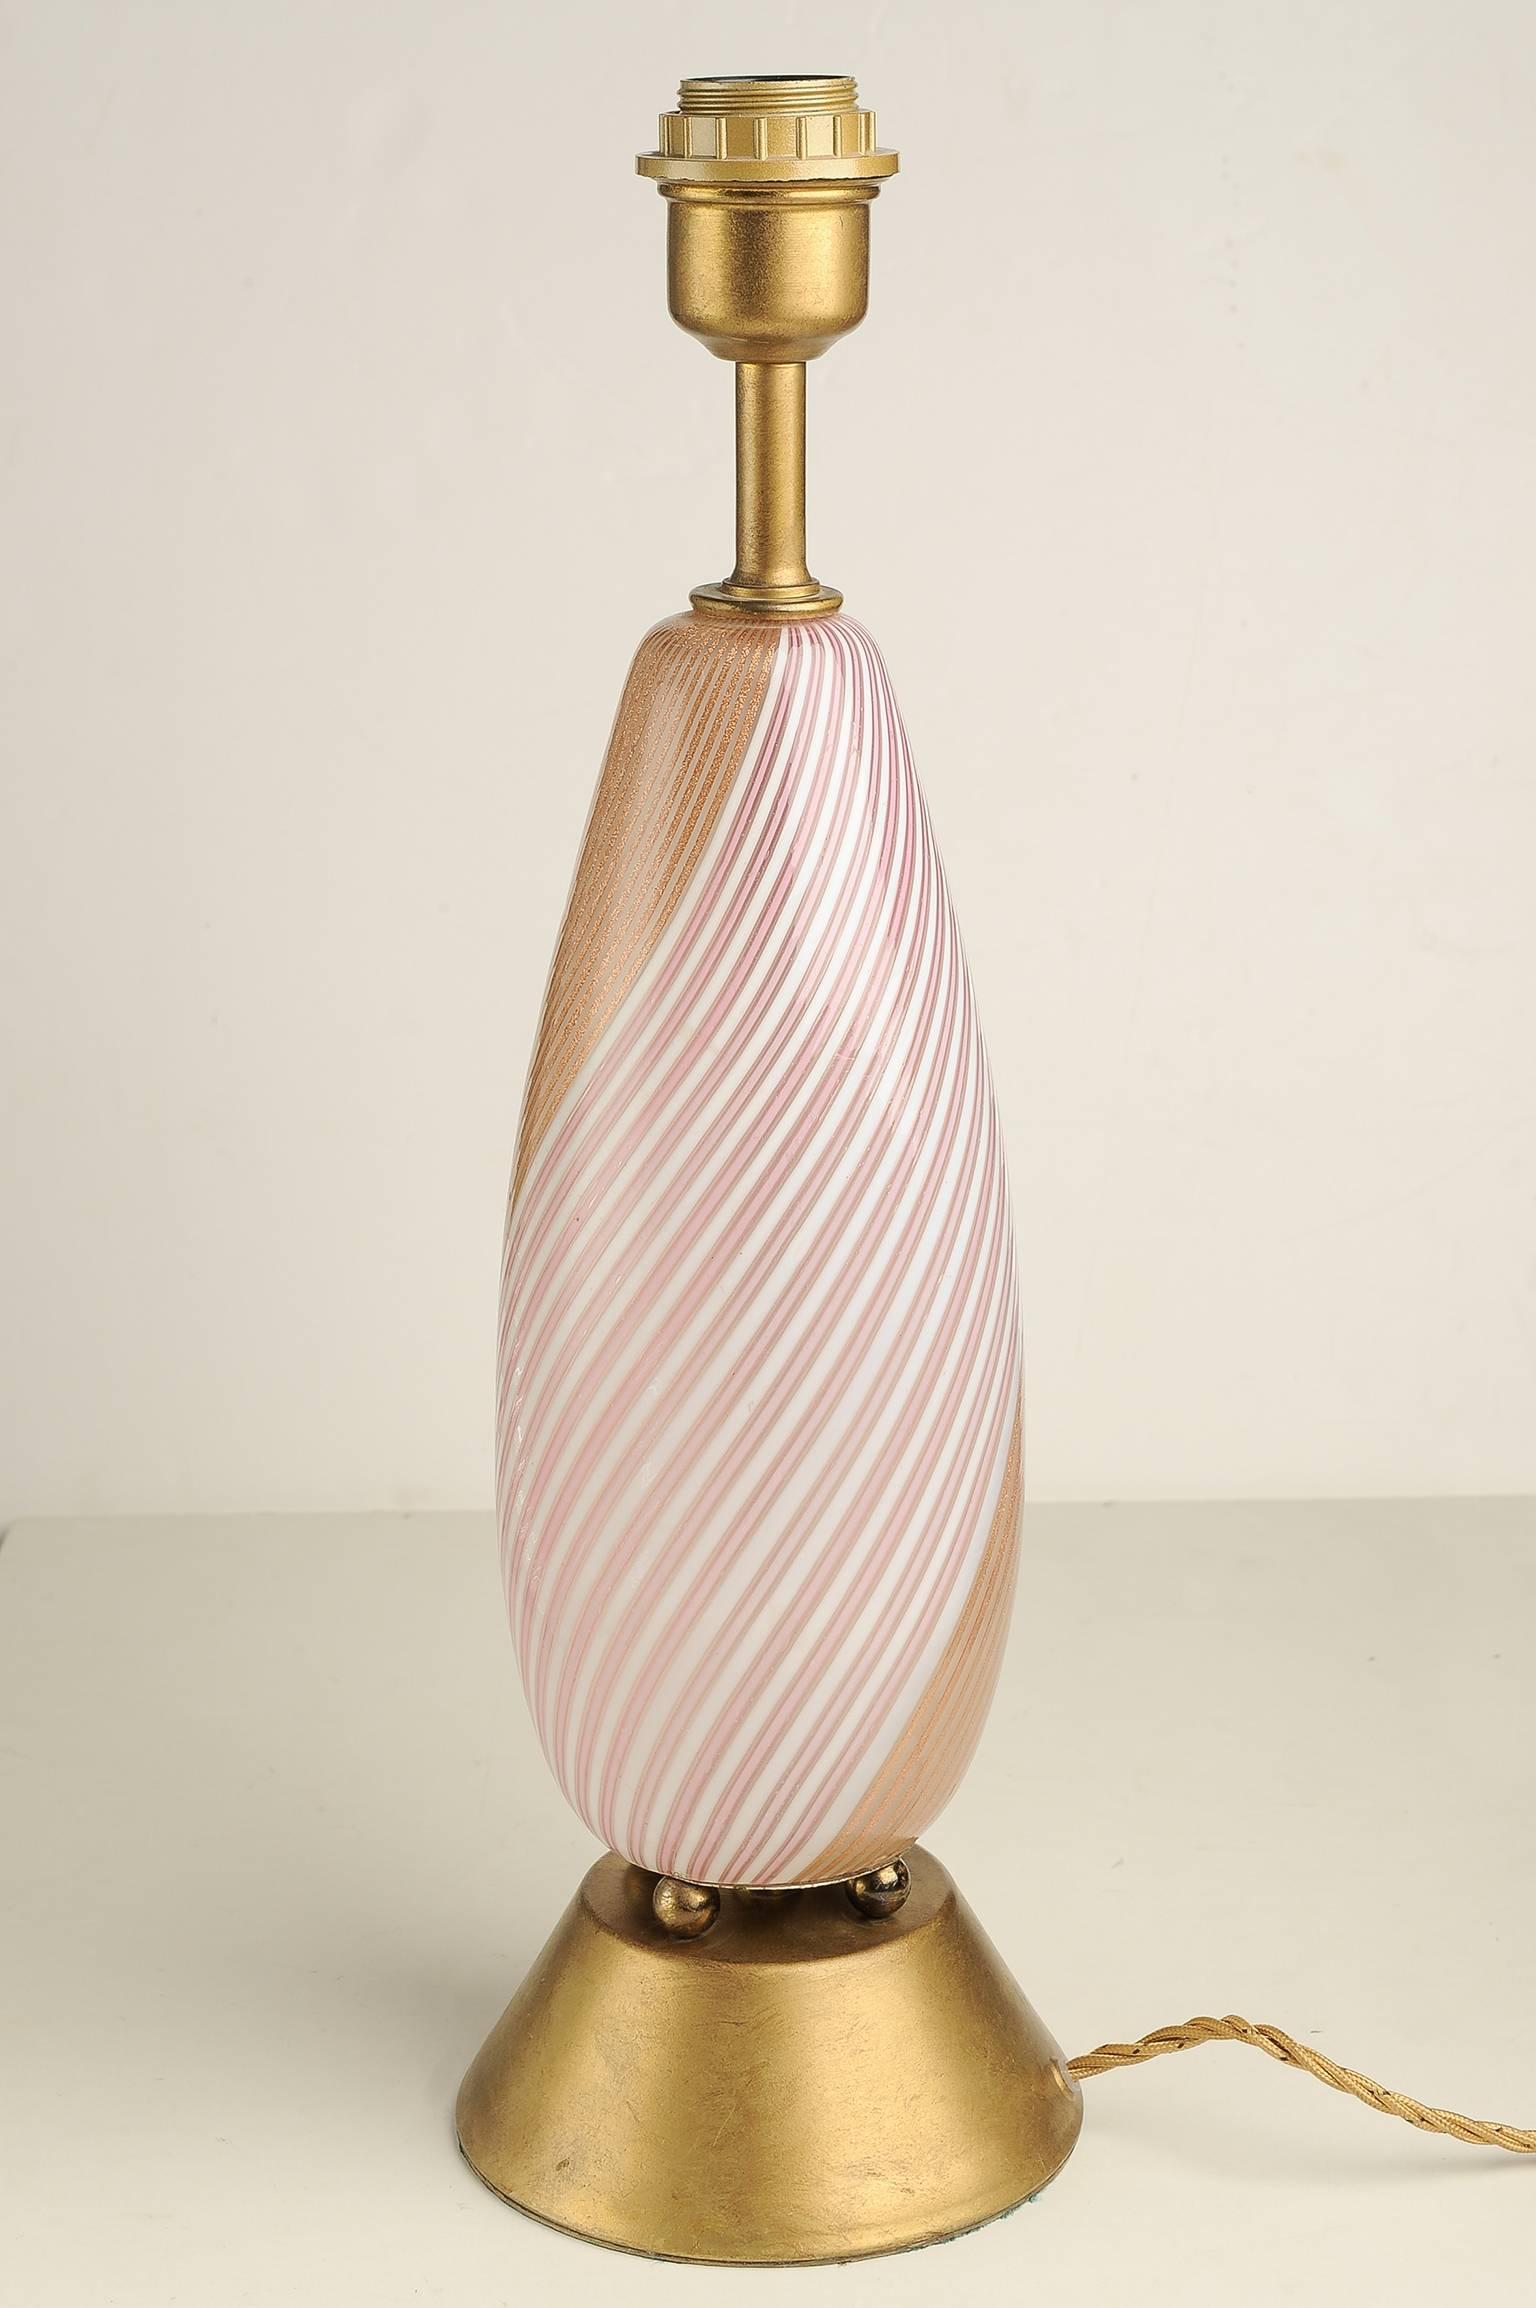 Pair of elegant Murano table lamps, pink and copper diagonal lines - suitable everywhere -
O/4150.
